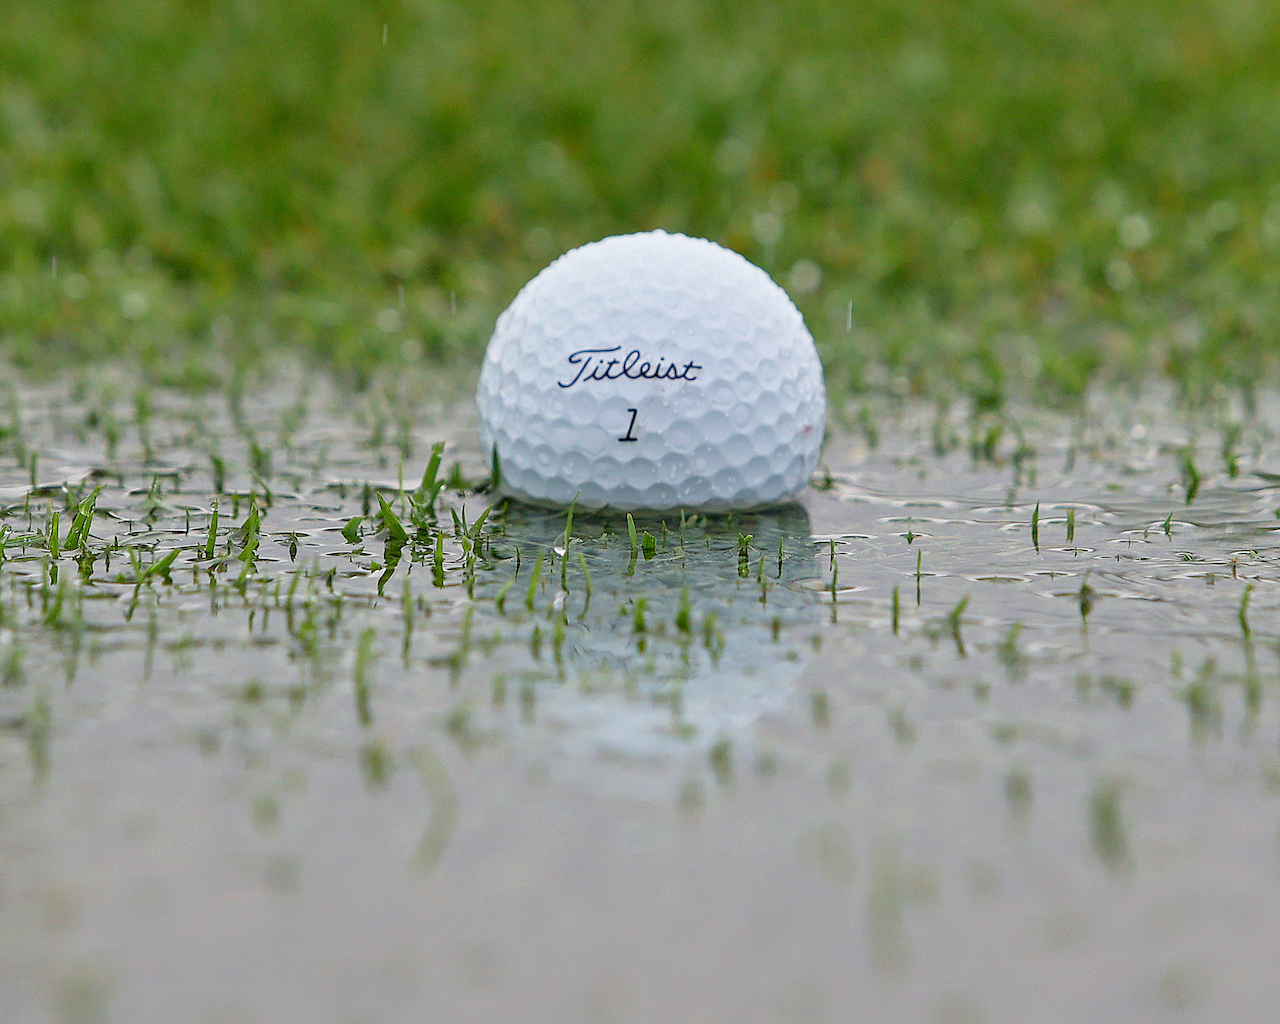 Golf ball in puddle